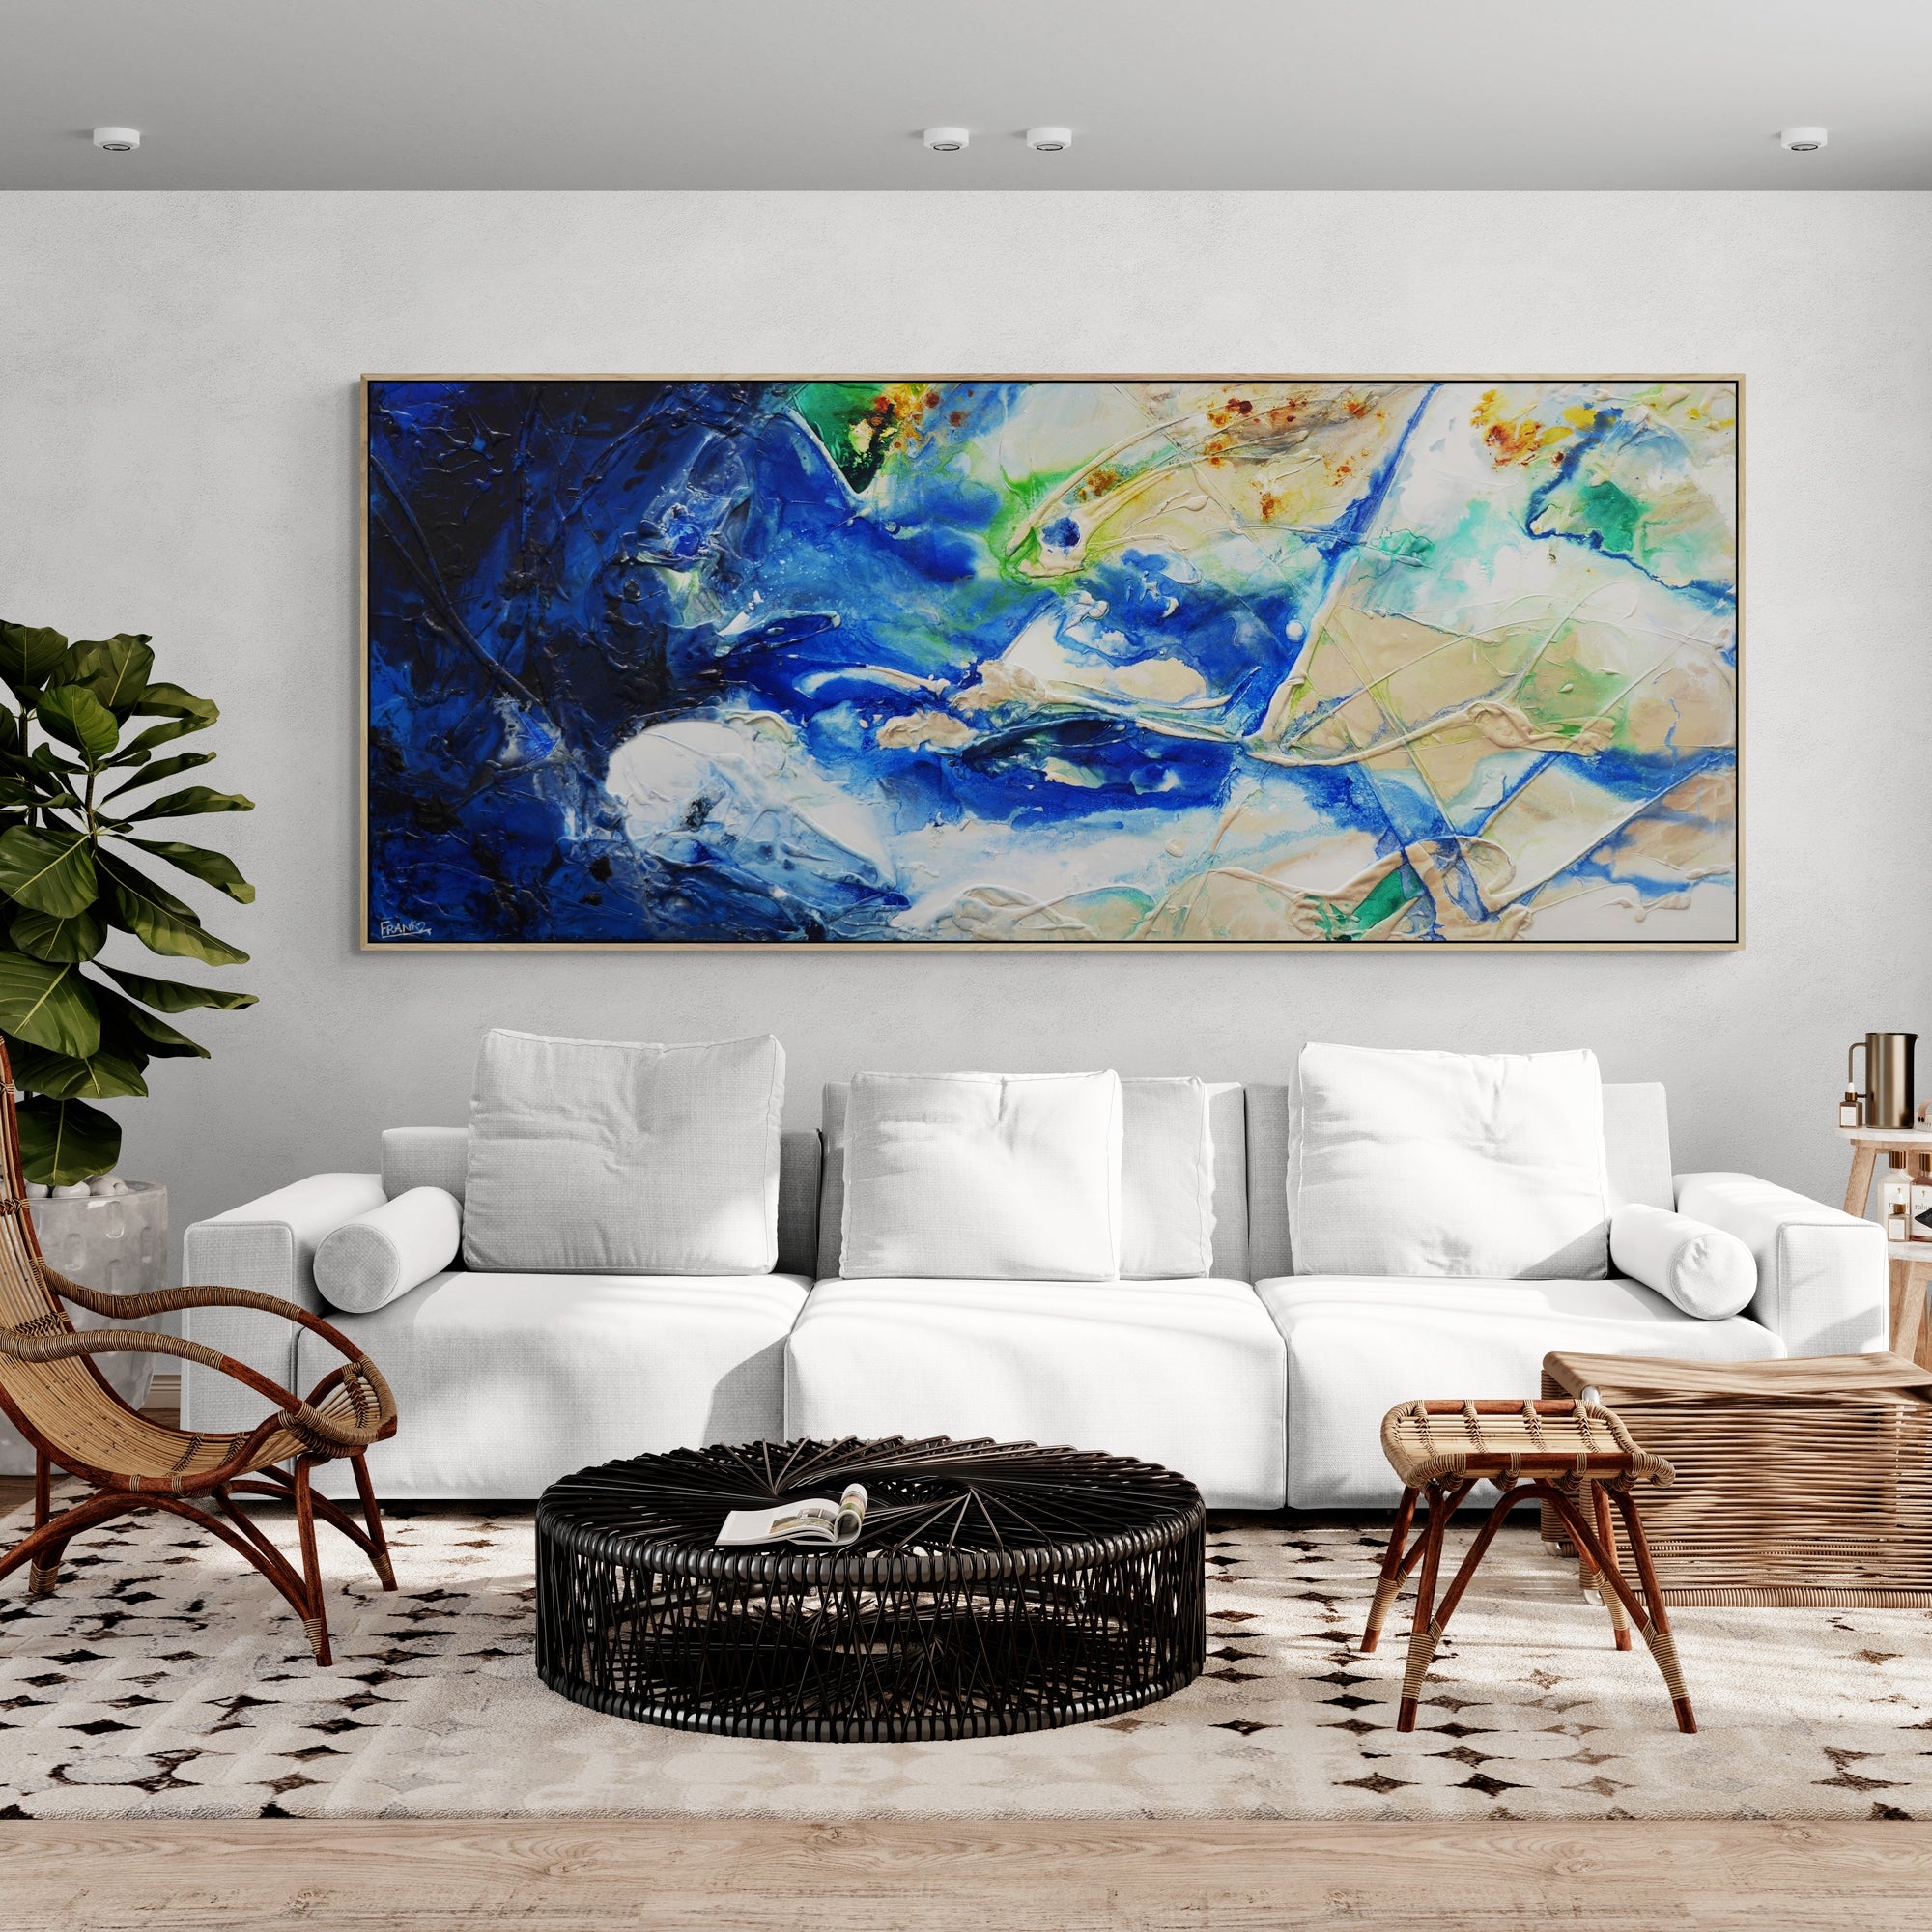 The Natural 240cm x 100cm Blue Green Cream Textured Abstract Painting